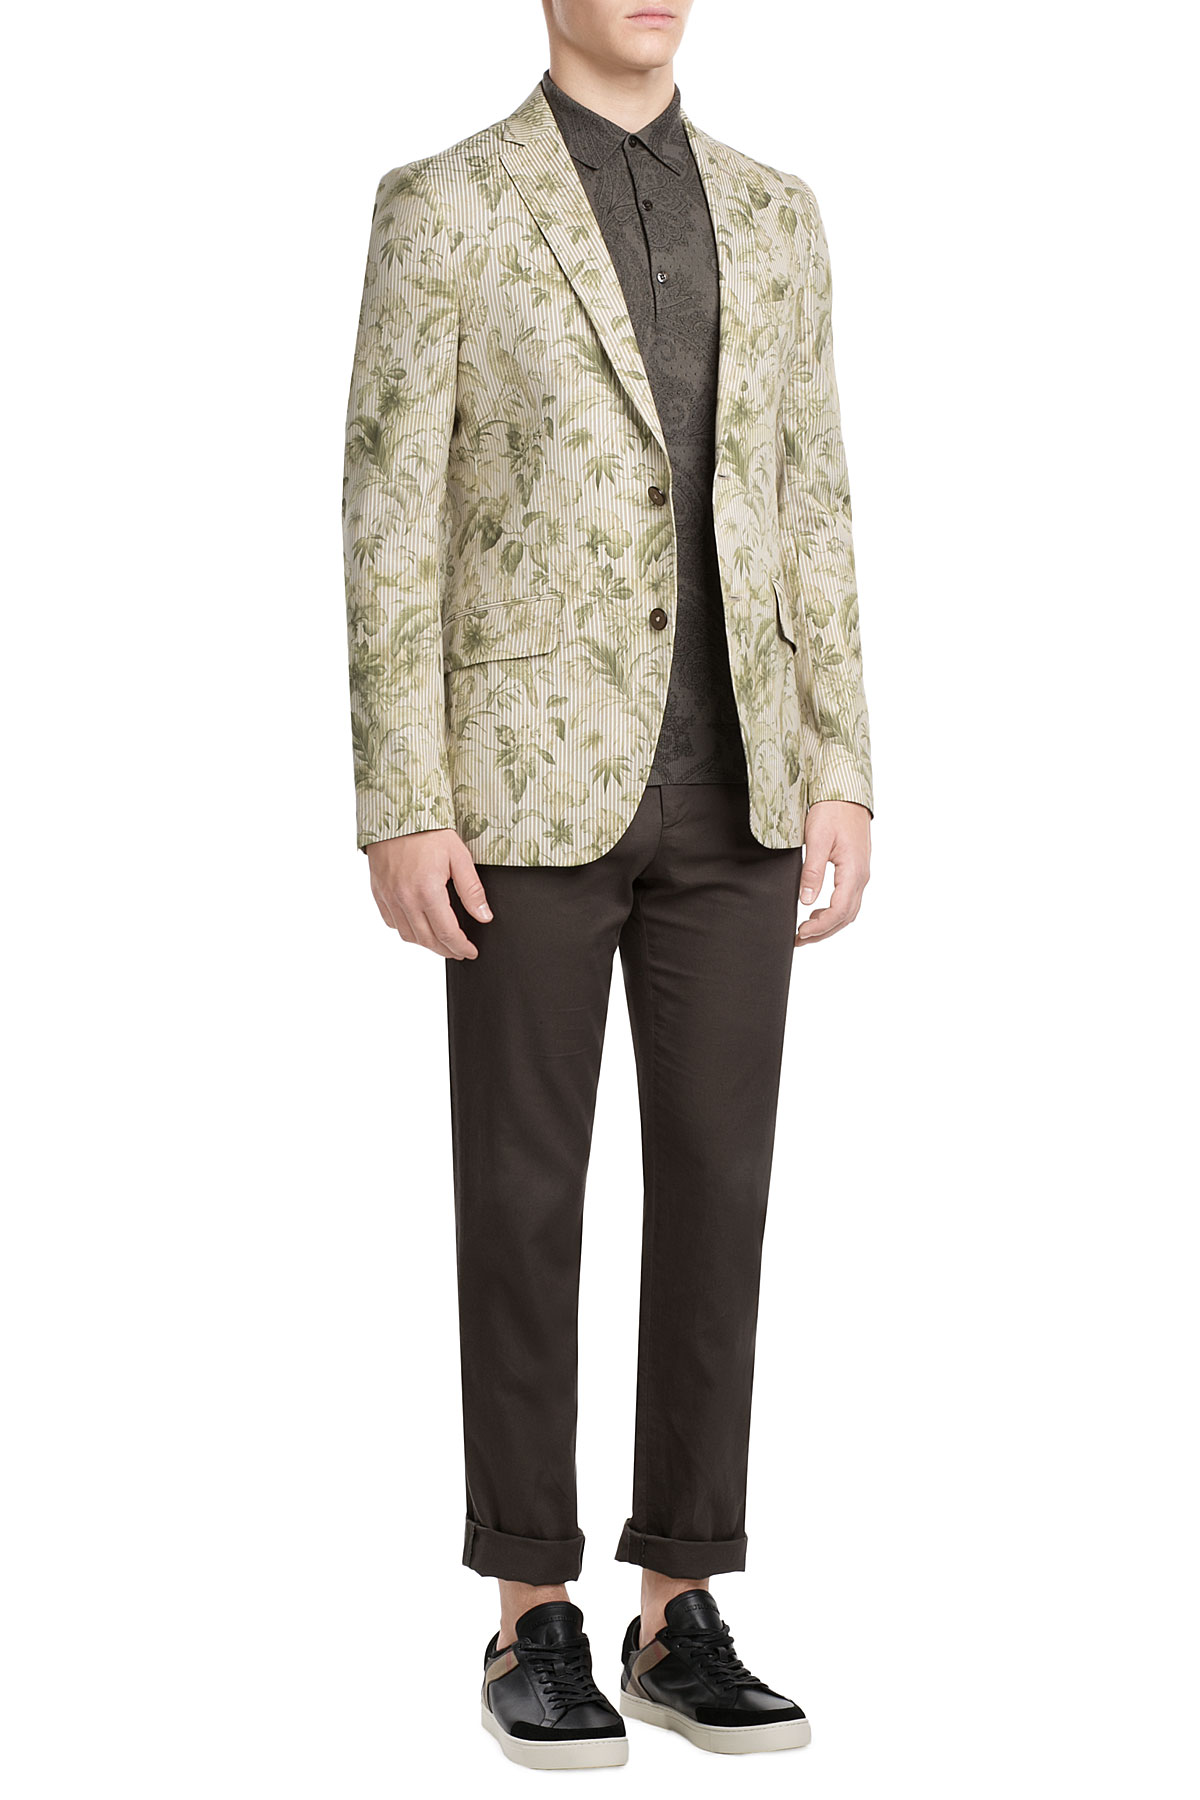 Spring Preview: Etro Delivers Both Casual & Formal Dandy Styles | The ...